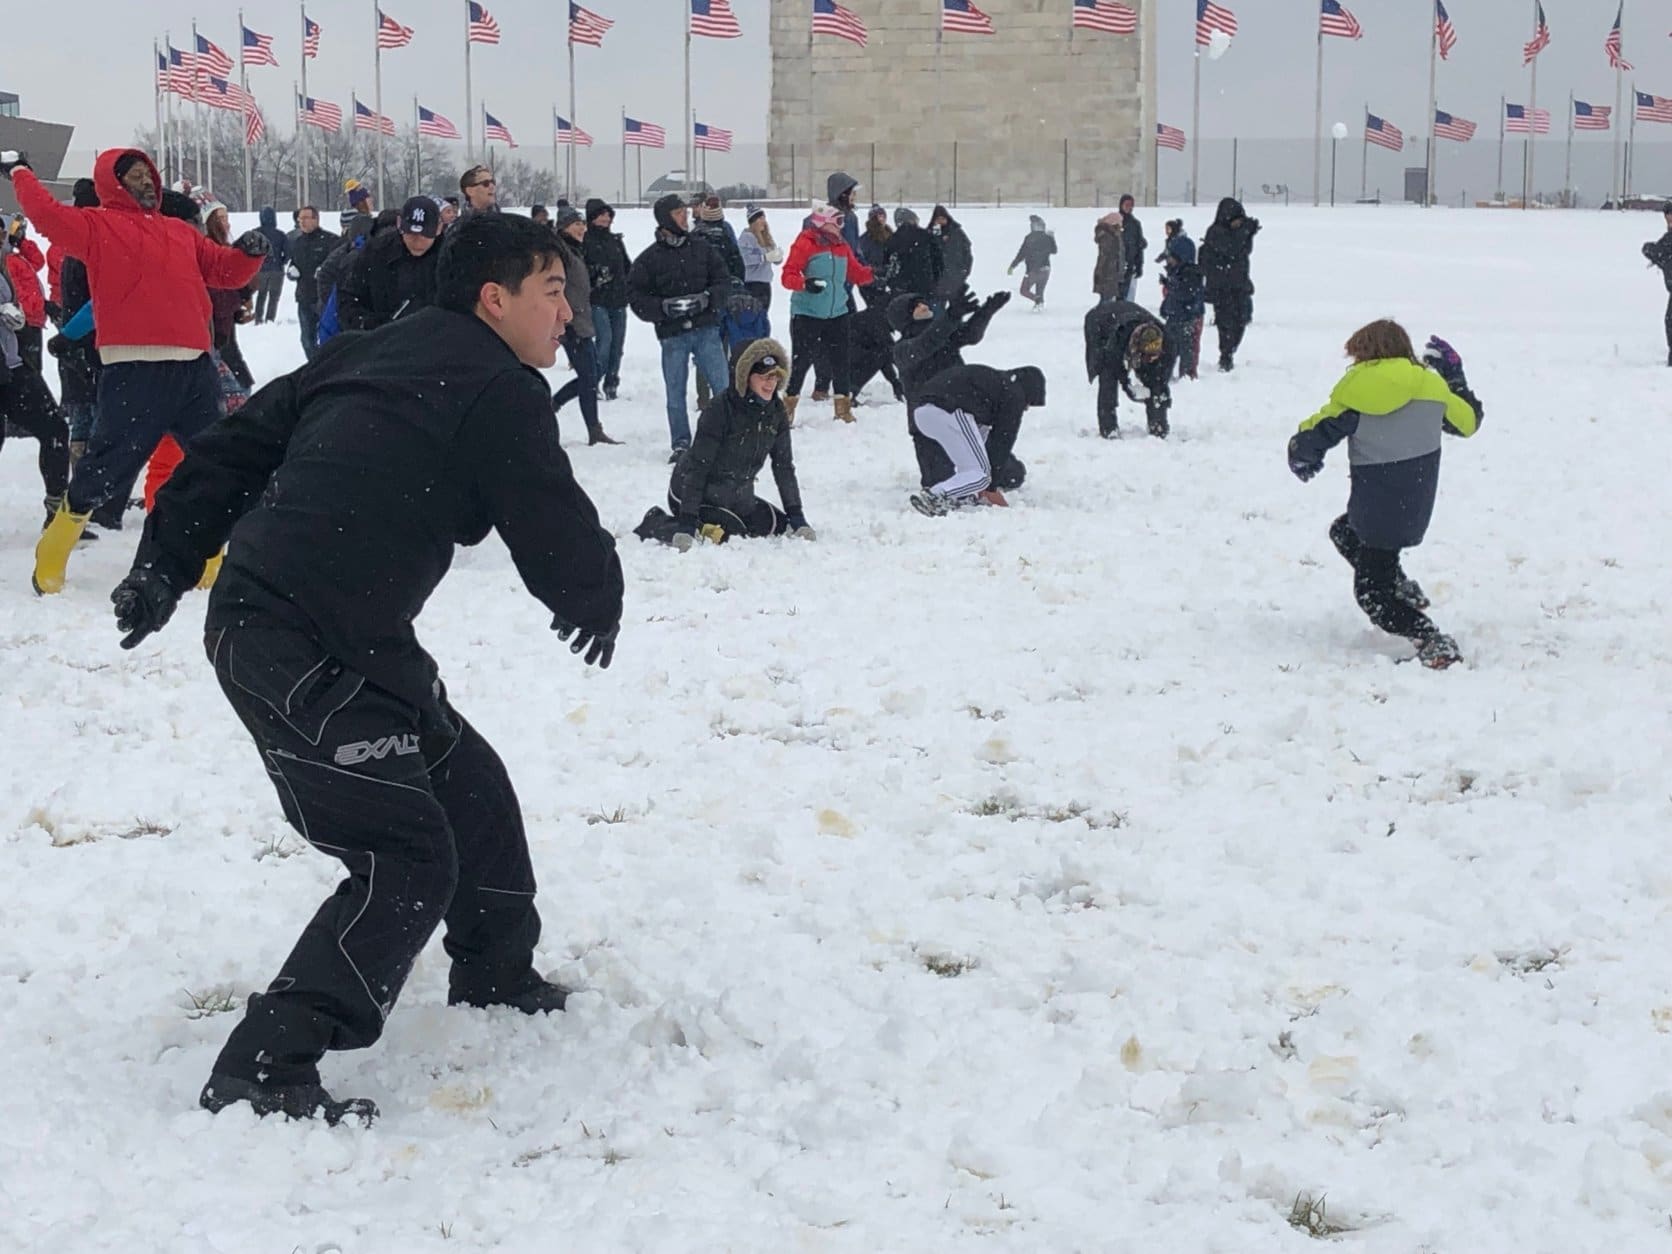 The Washington Monument was the site of a massive snowball fight on Sunday. (WTOP/Keara Dowd)